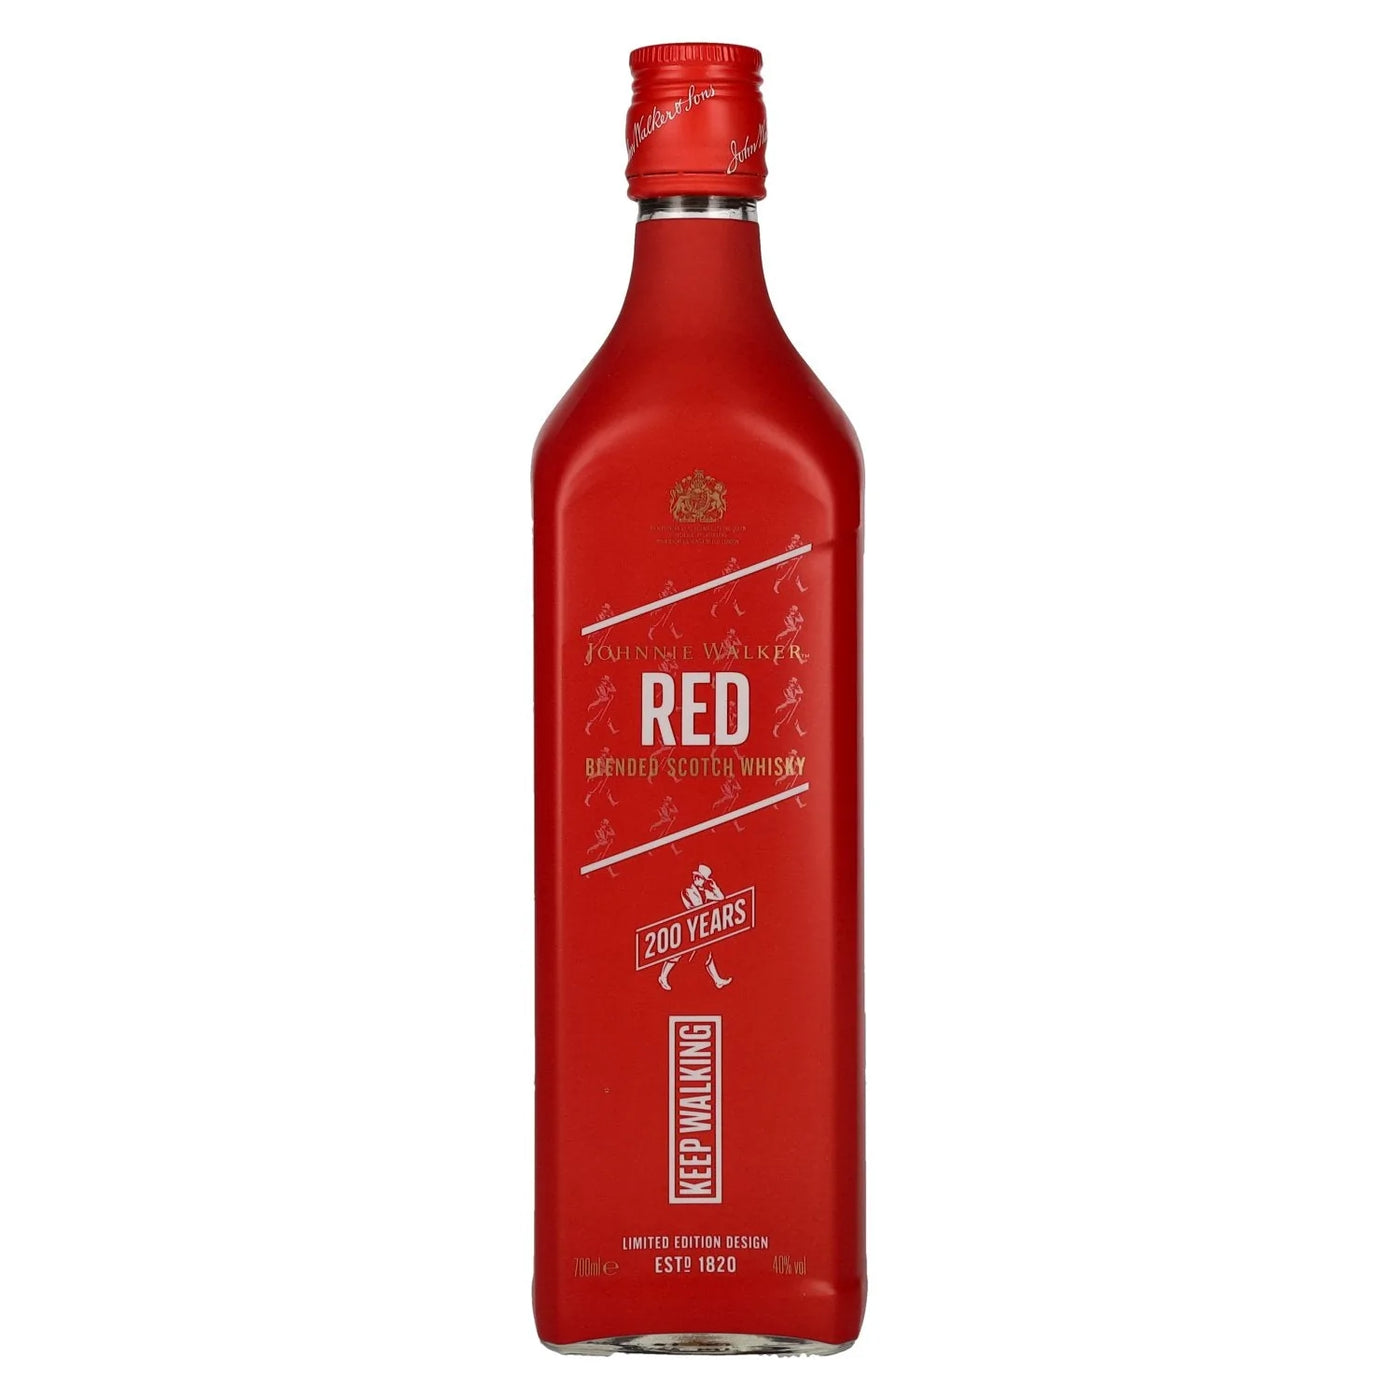 BUY] Johnnie Walker Red, Keep Walking, Limited Edition Design Scotch Whisky  | 700ML at